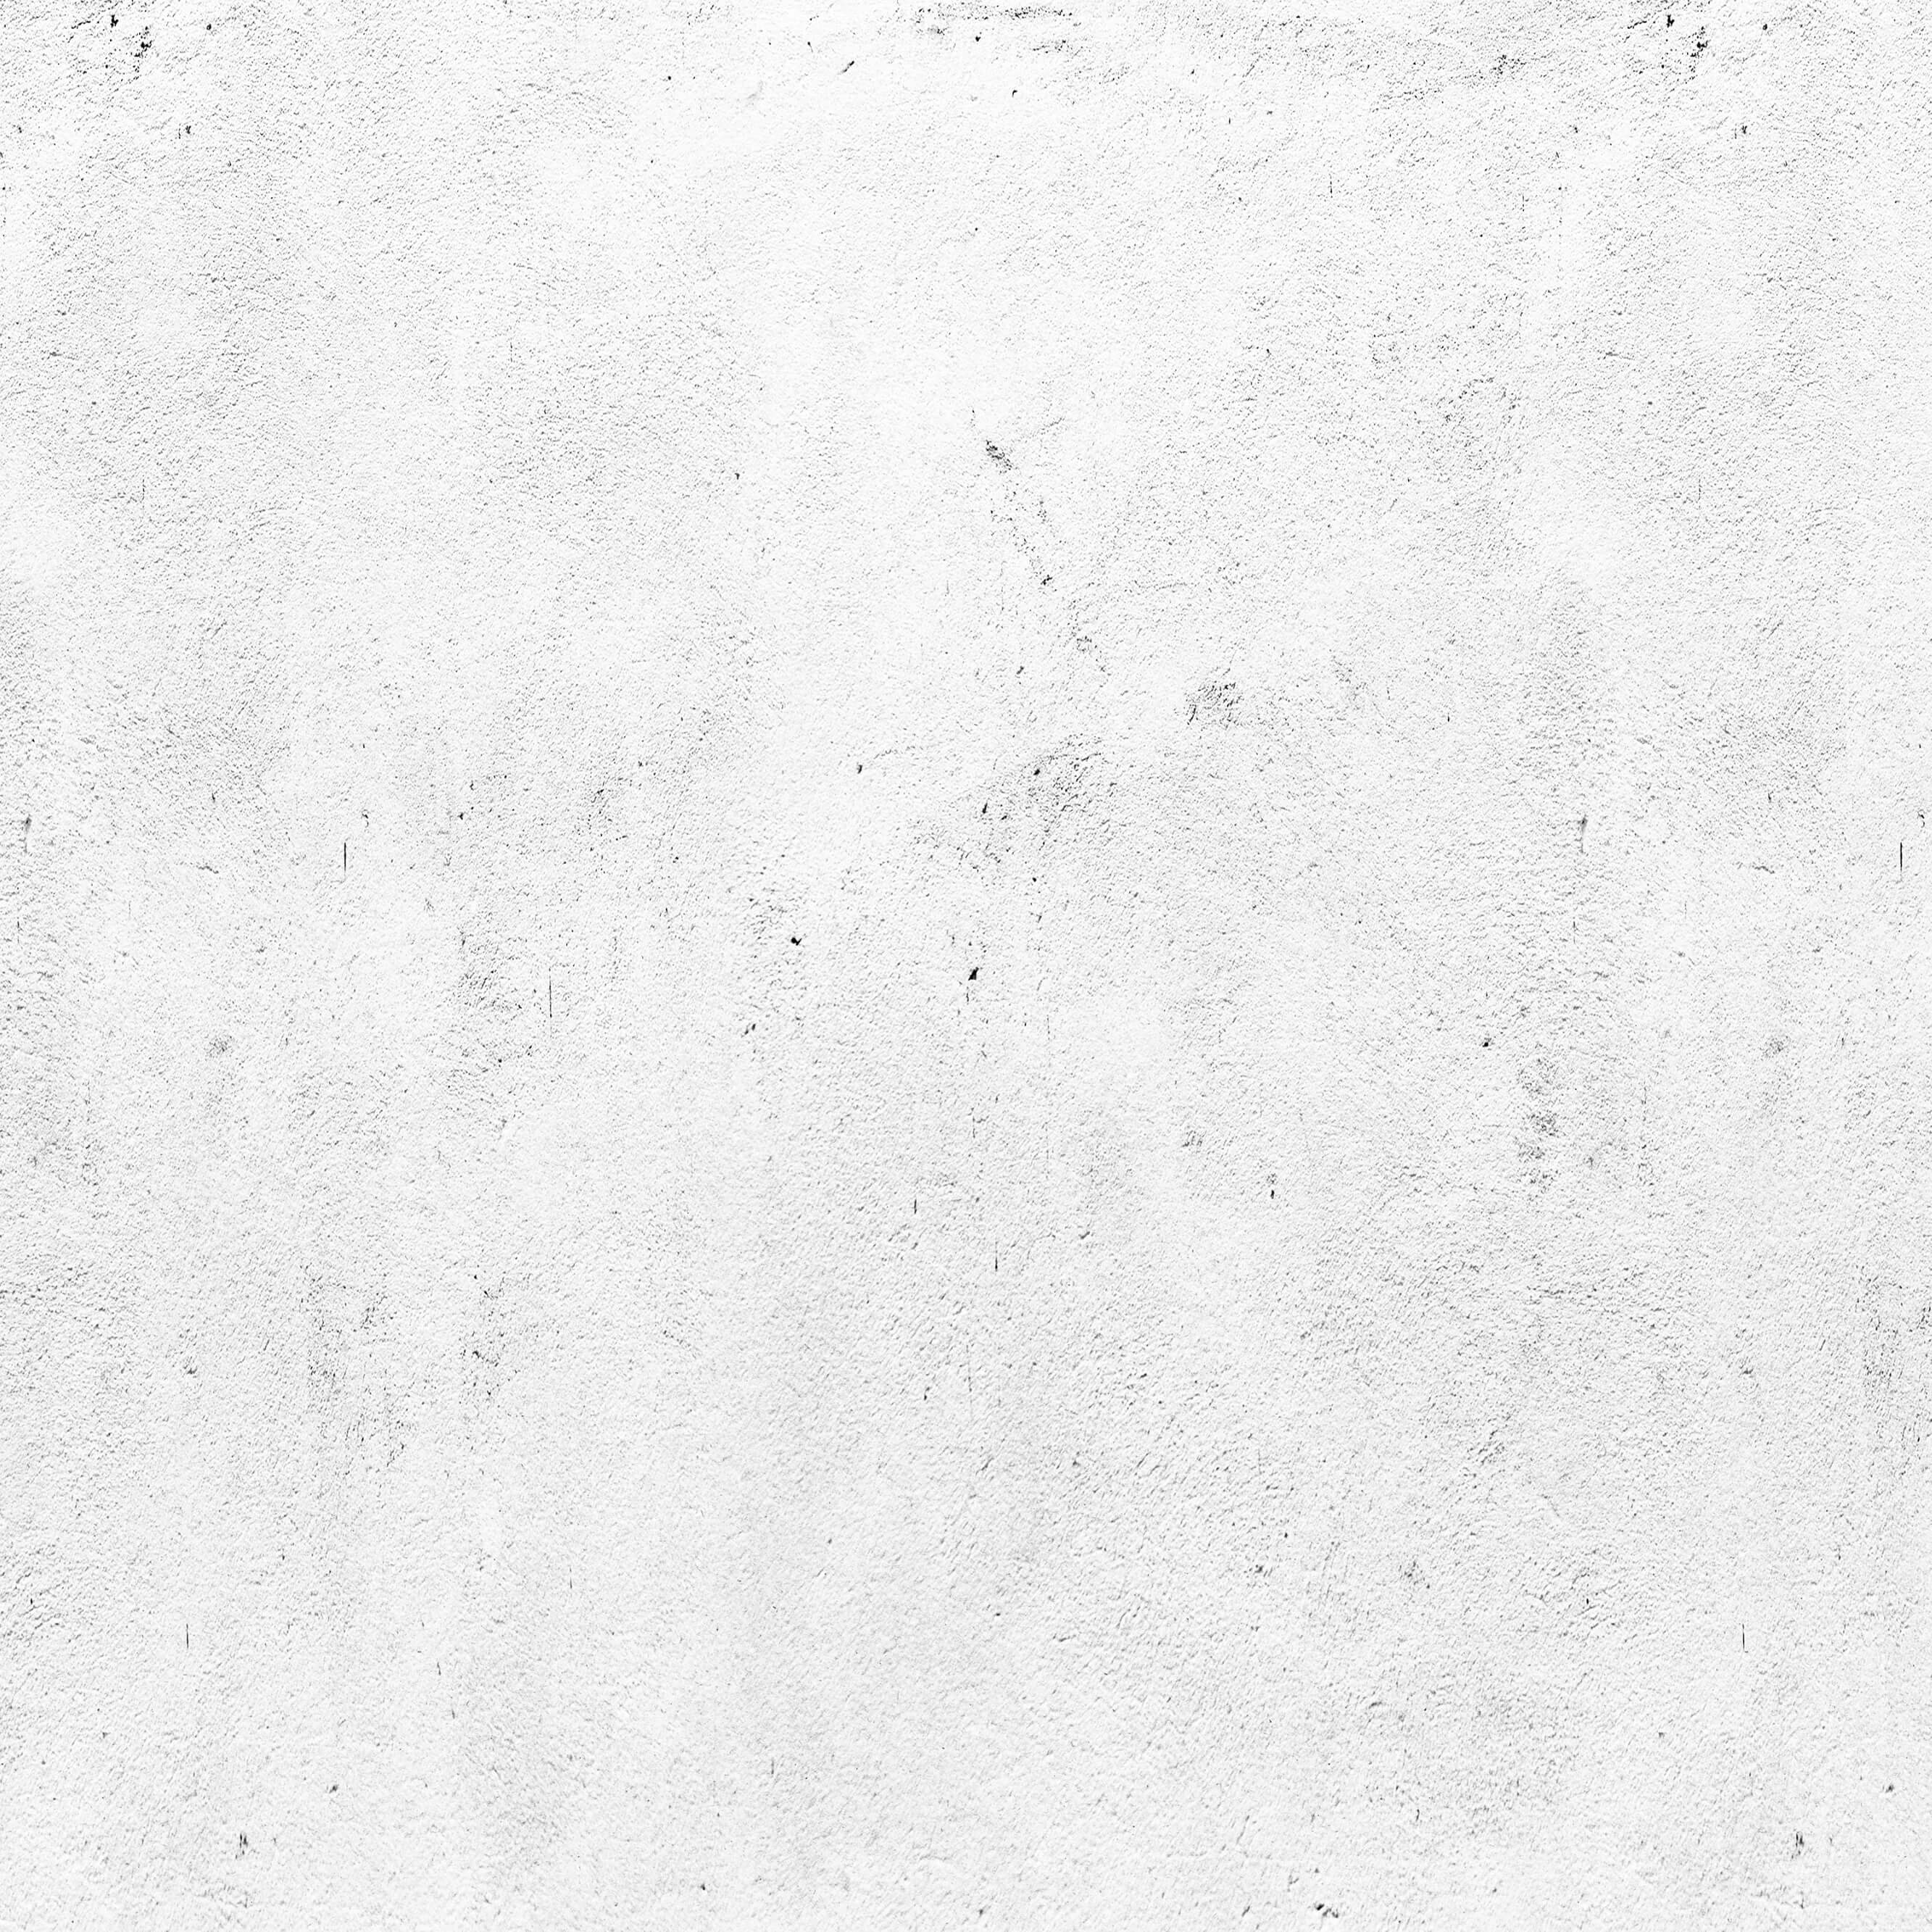 White black life iPhone Wallpapers Free Download